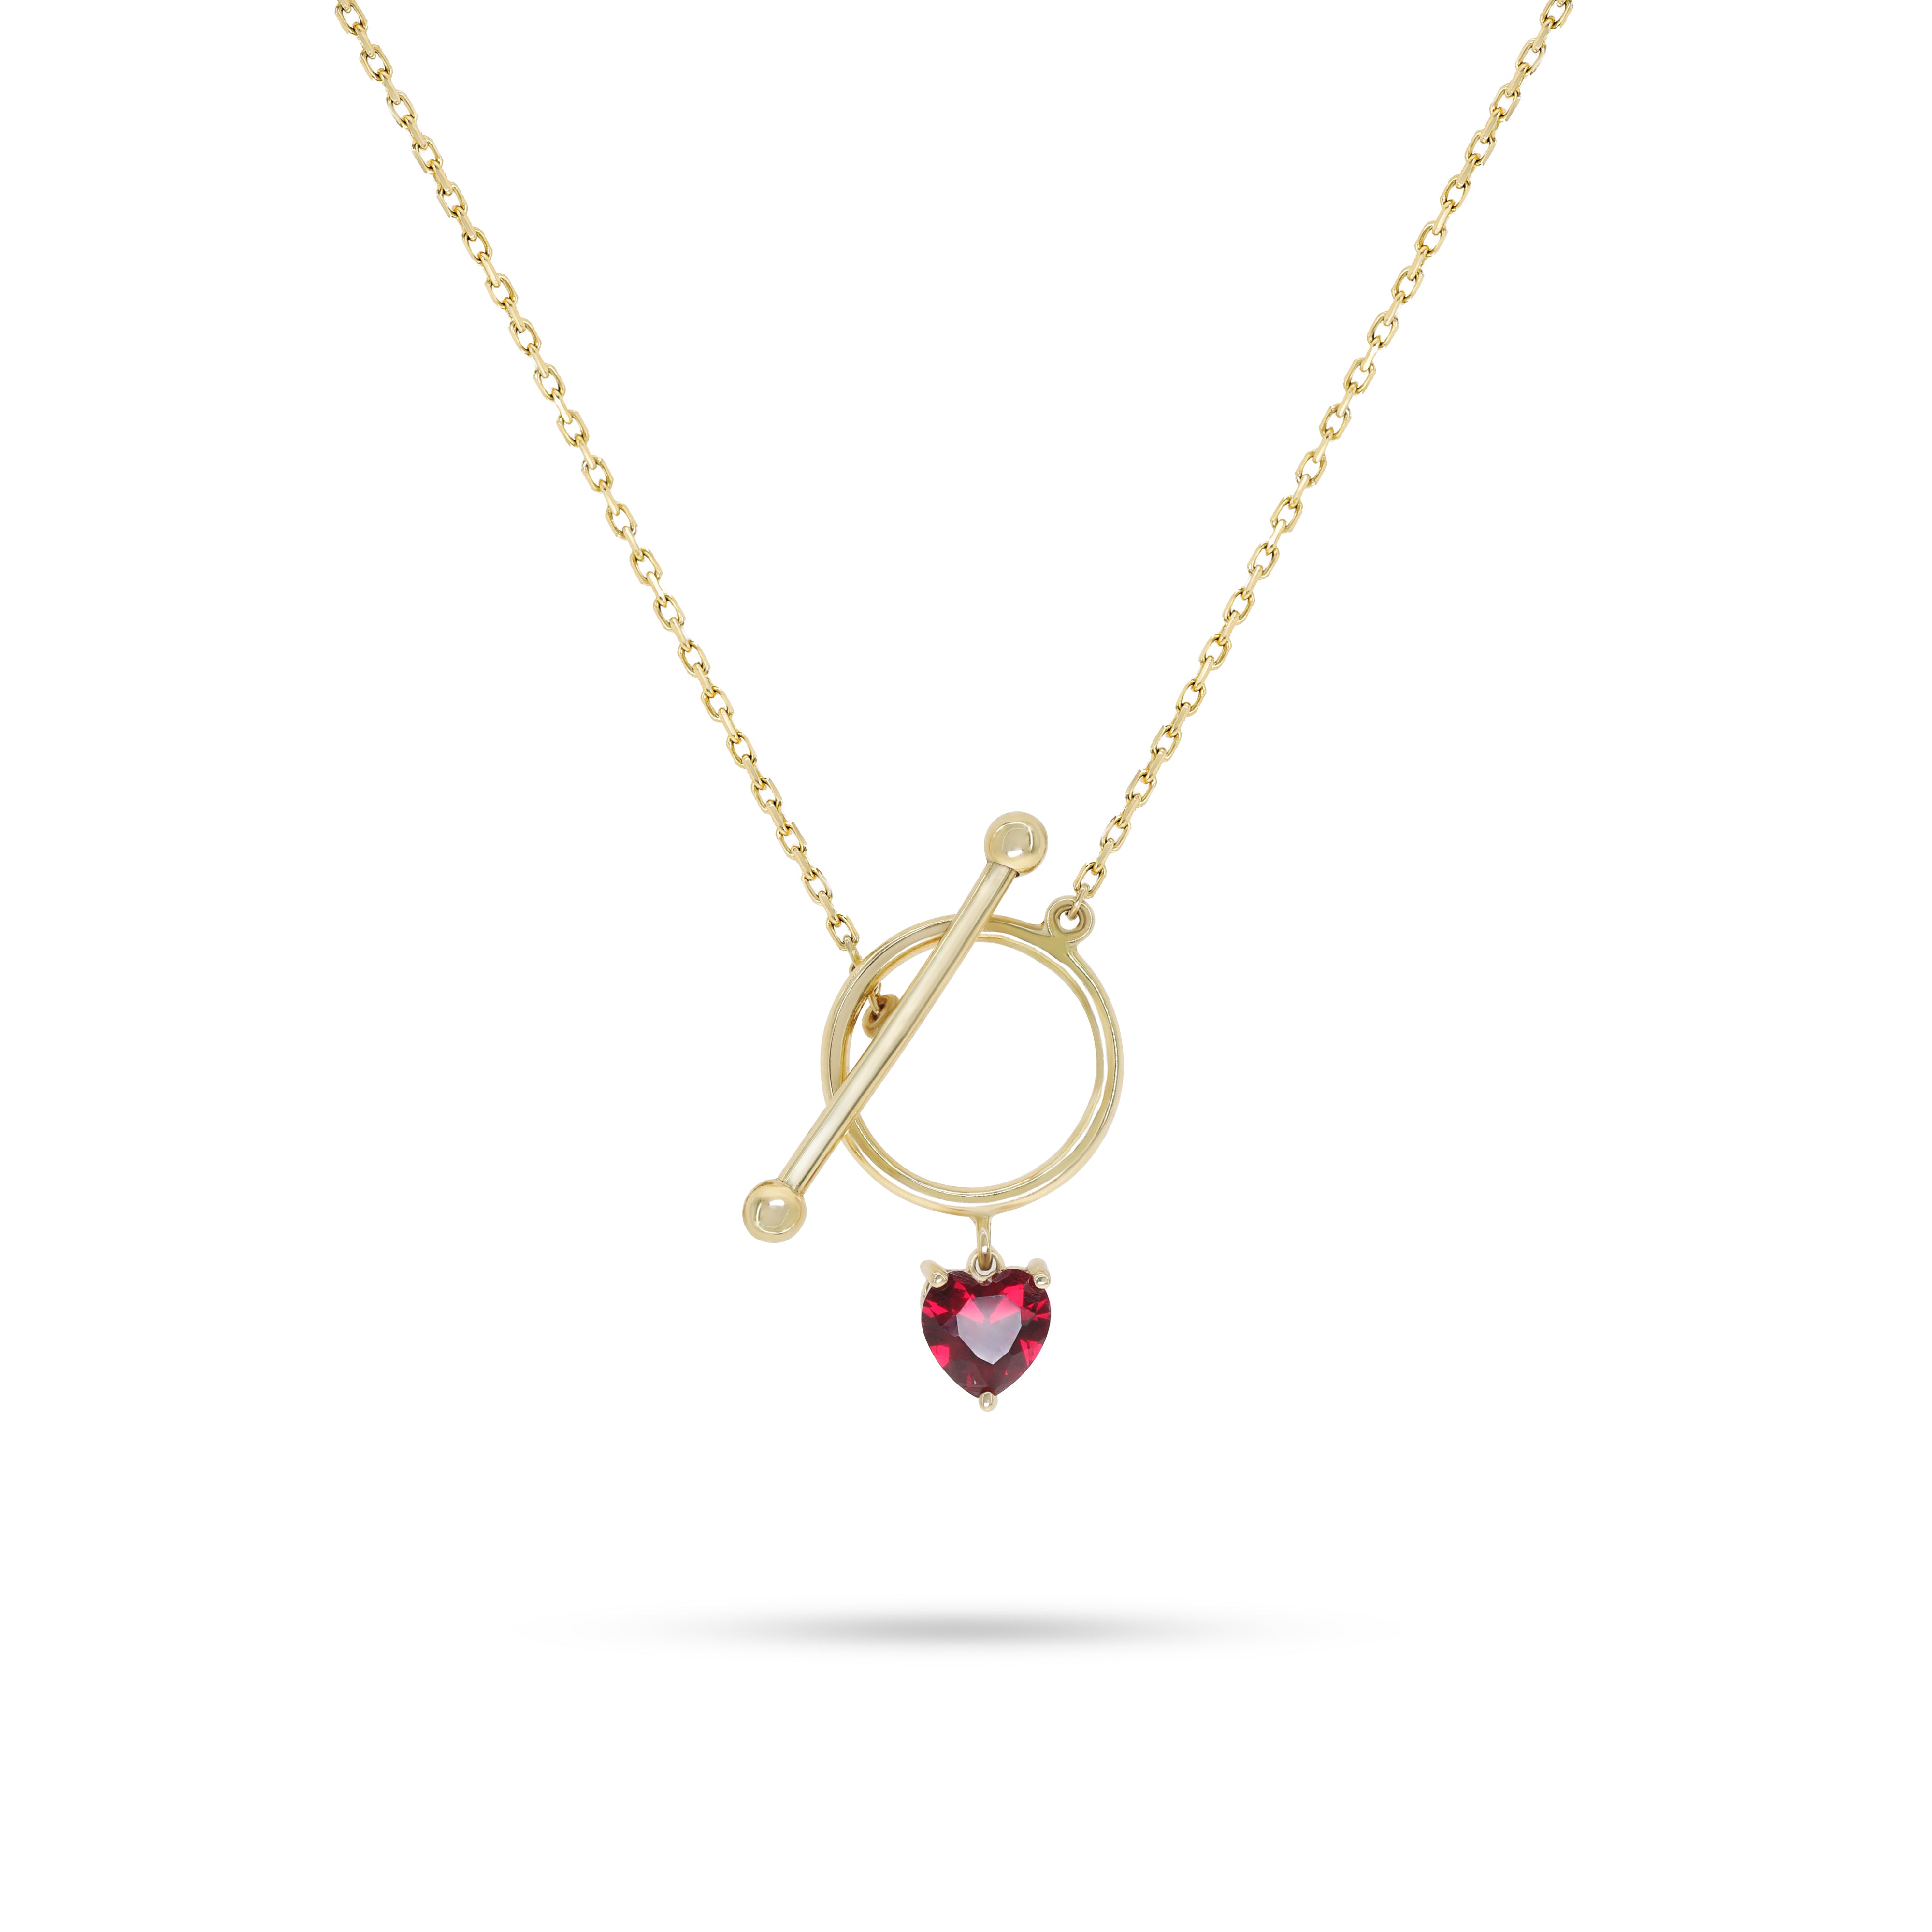 Heart shaped necklace with adjustable length - K-P111S